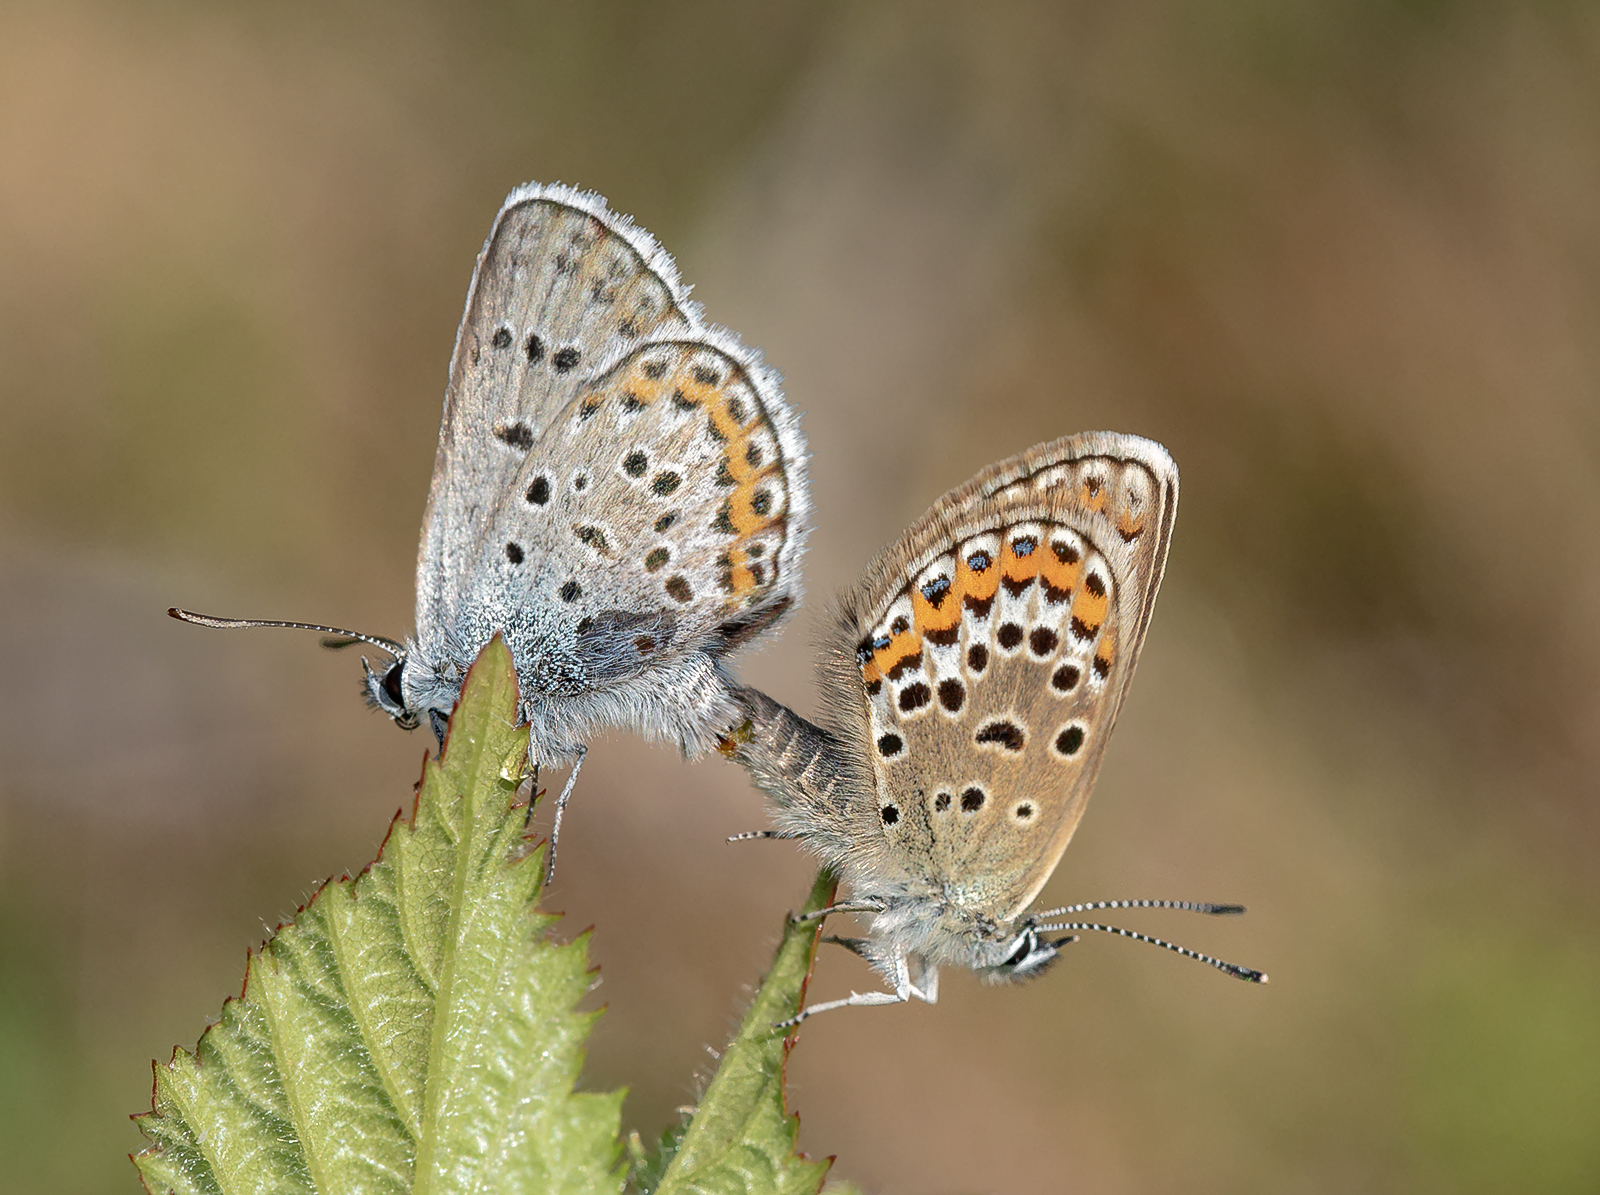 Silver Studded Blues Mating By John Simpson